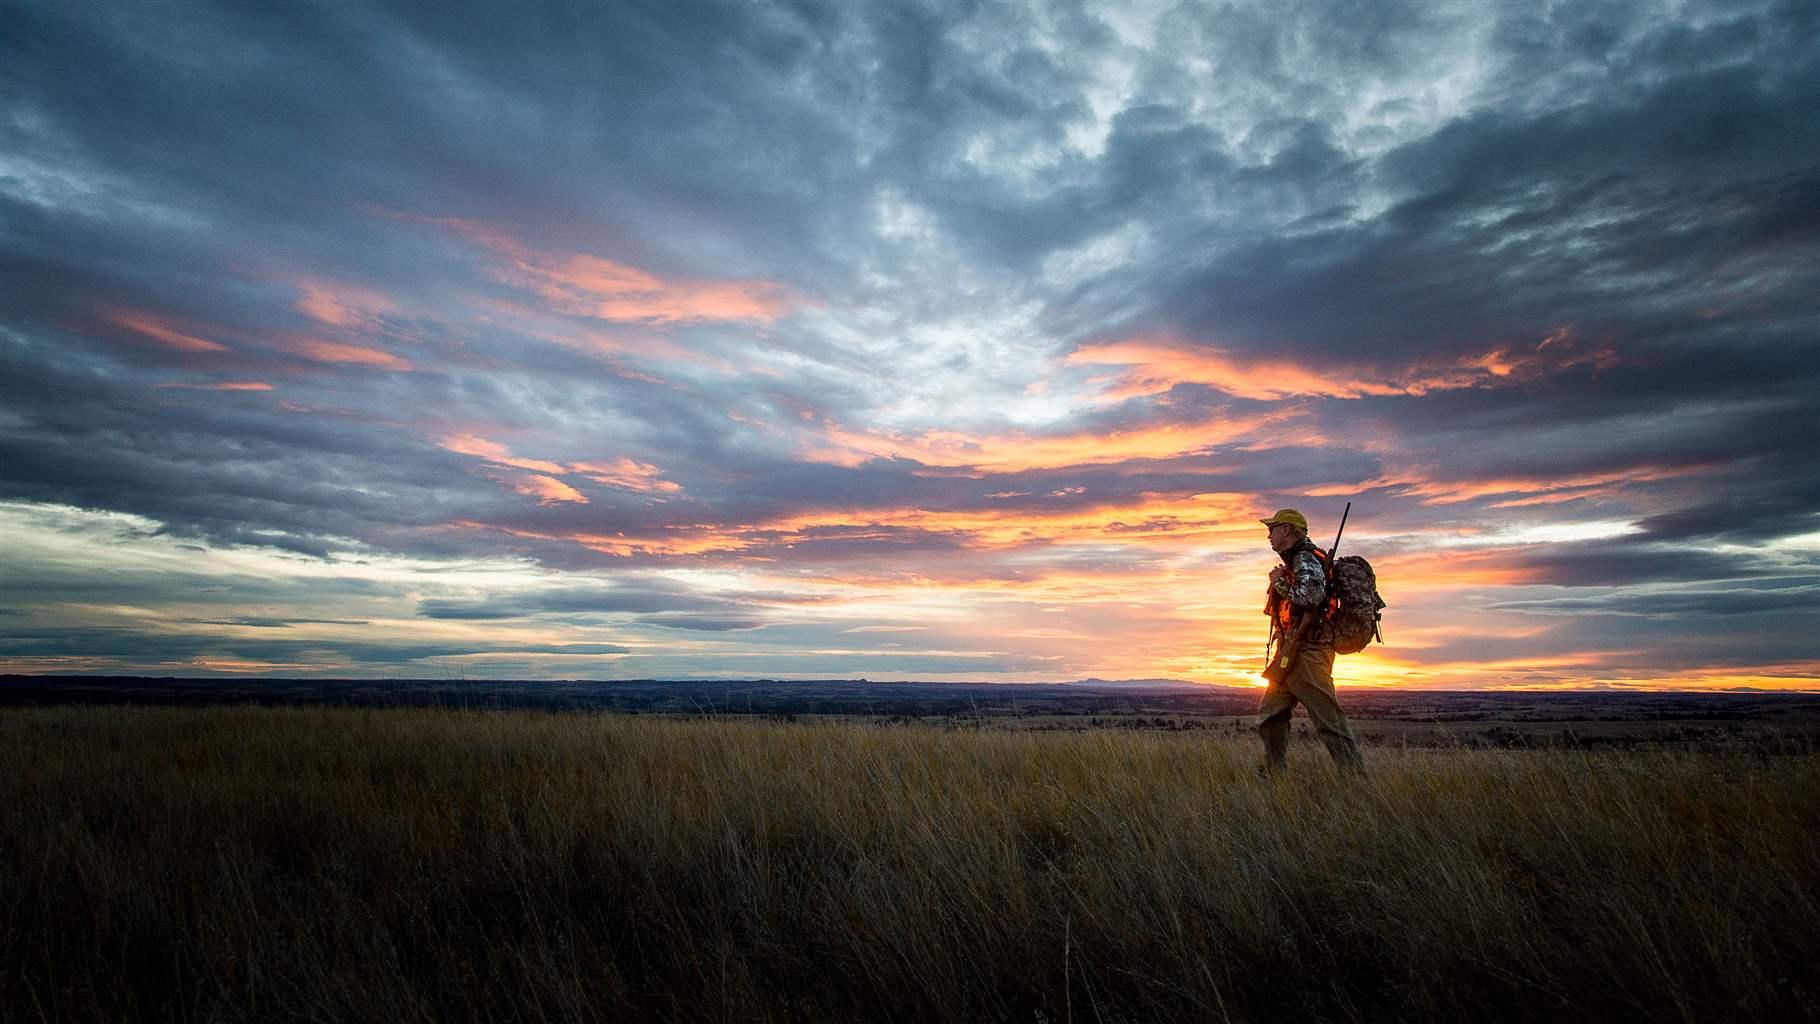 A hunter walking in a field with the sunsetting behind him.